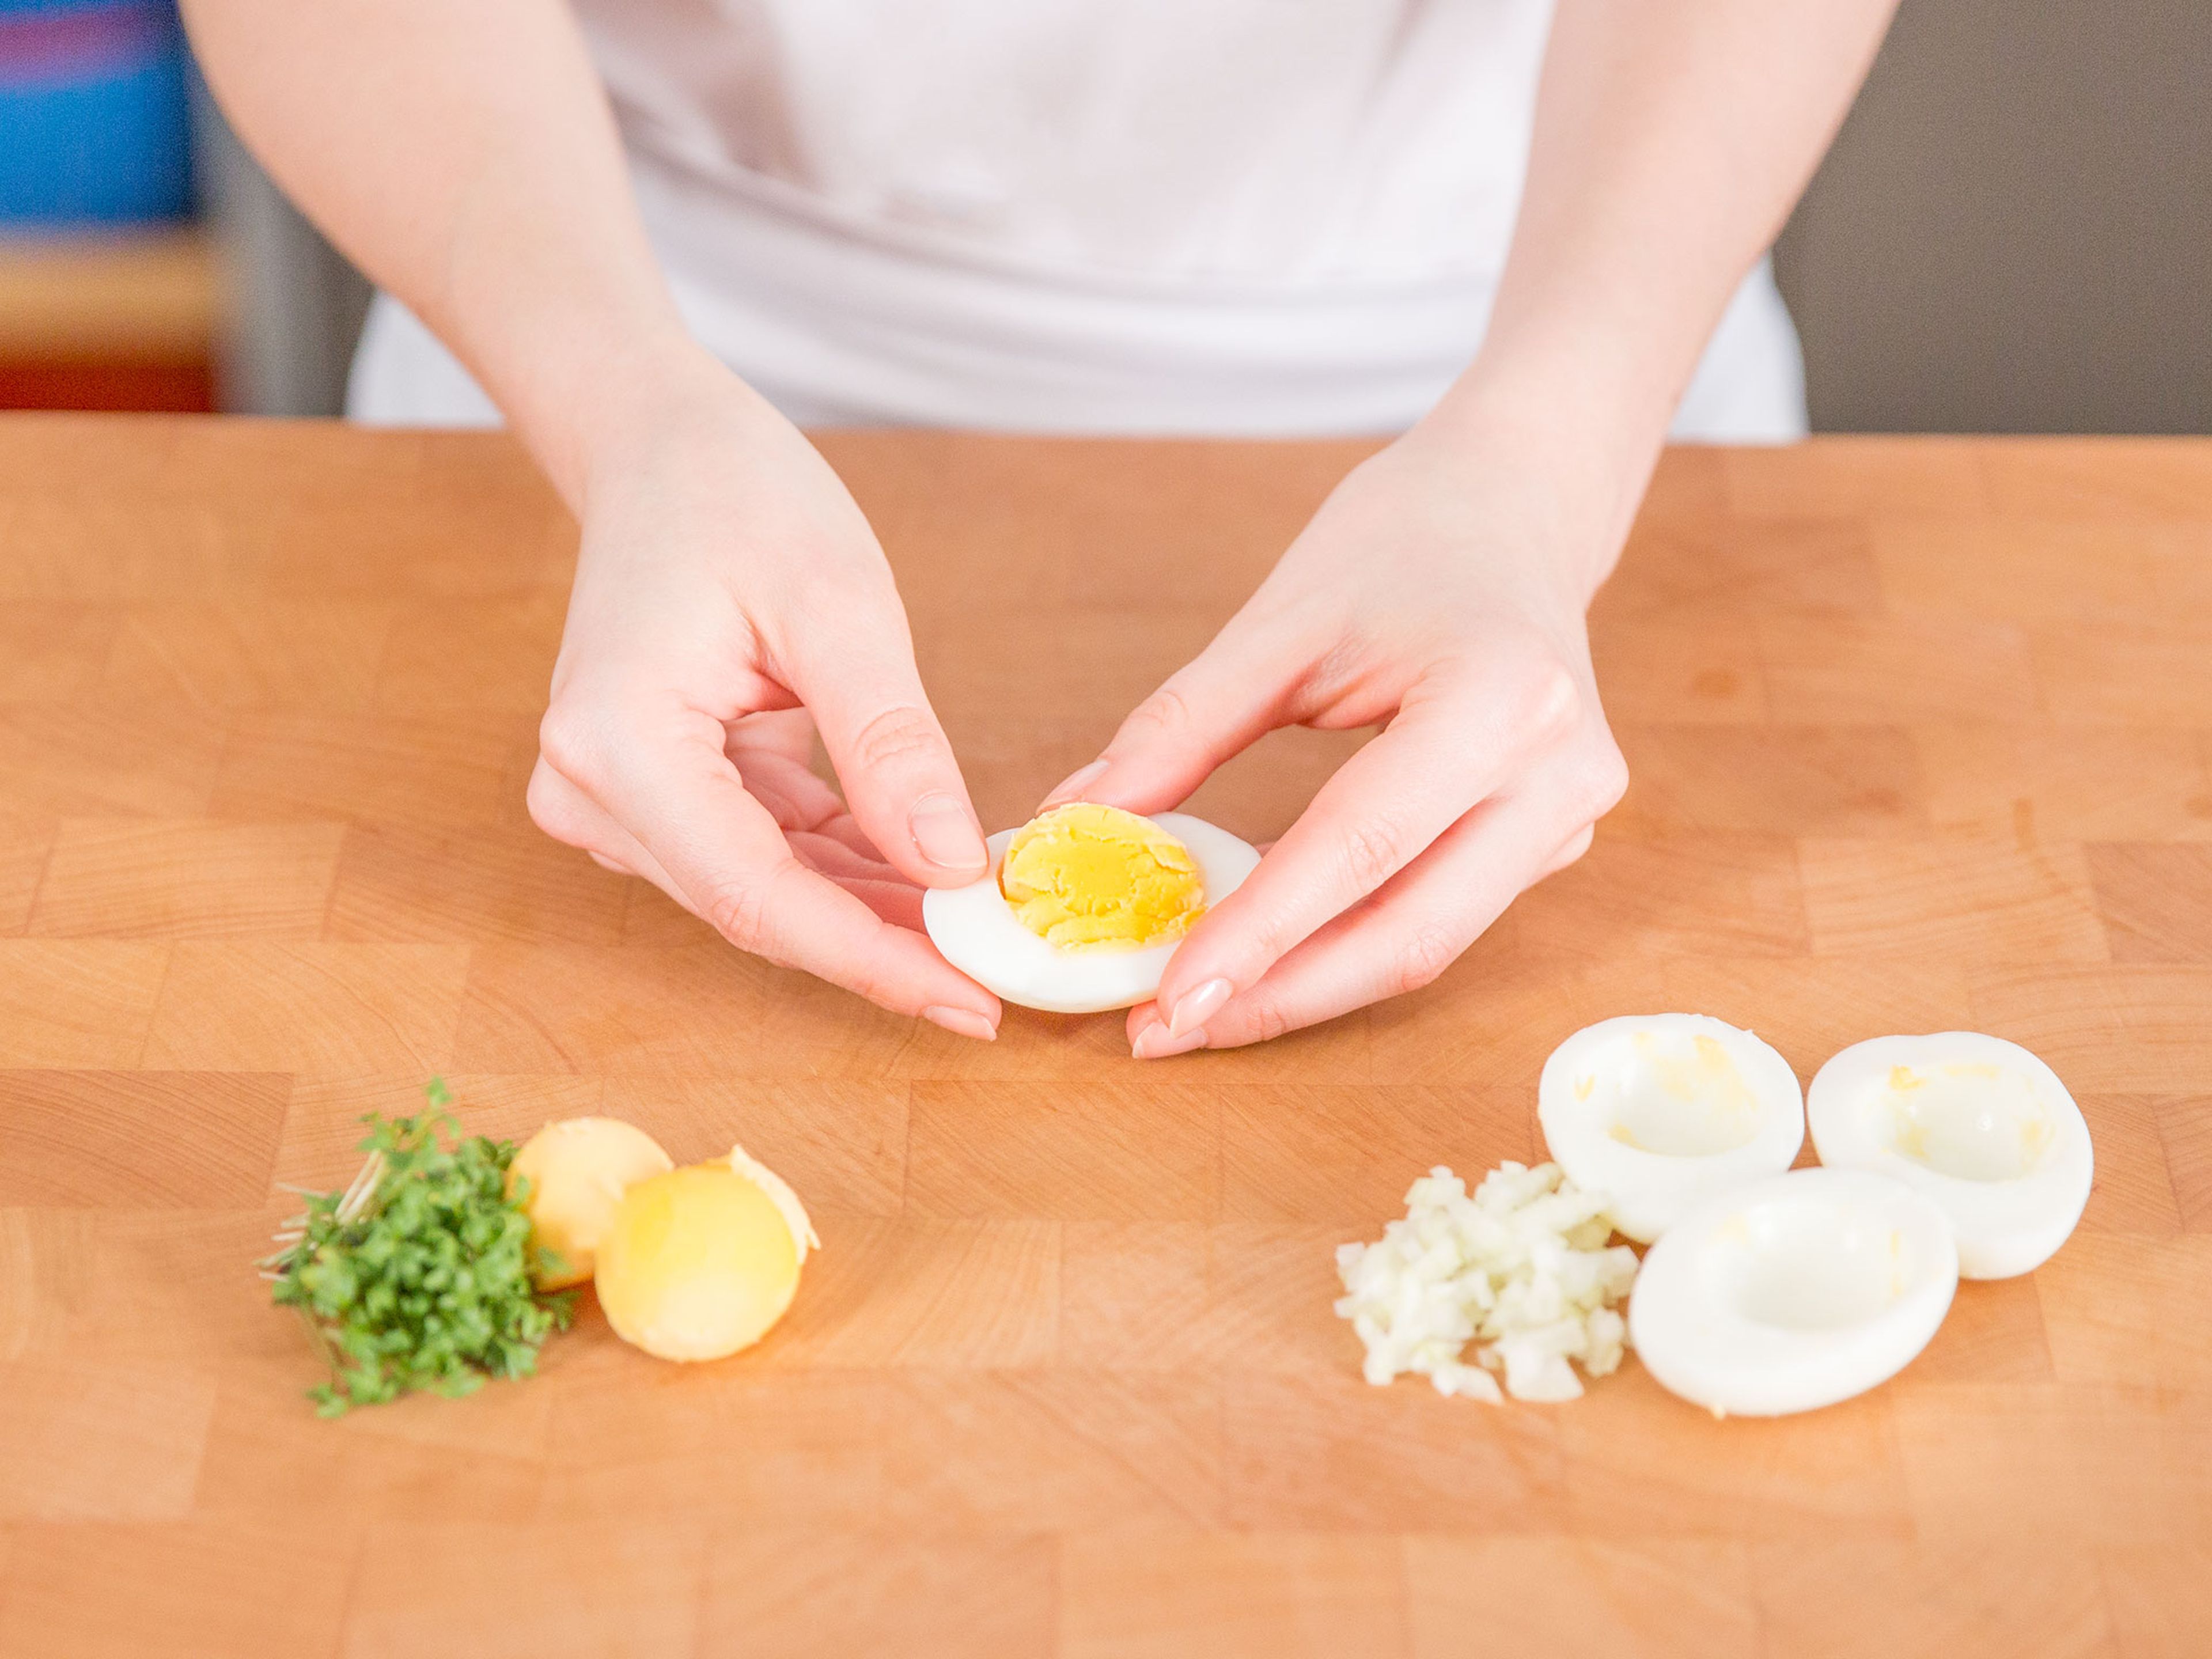 In a small saucepan, bring water to a boil. Boil eggs for ca. 8 – 10 min. then transfer to an ice bath. Peel eggs and halve lengthwise, then slice a small piece of white off of the bottom of each egg to create a flush surface. Remove egg yolks with a spoon. Set aside. Mince onion.